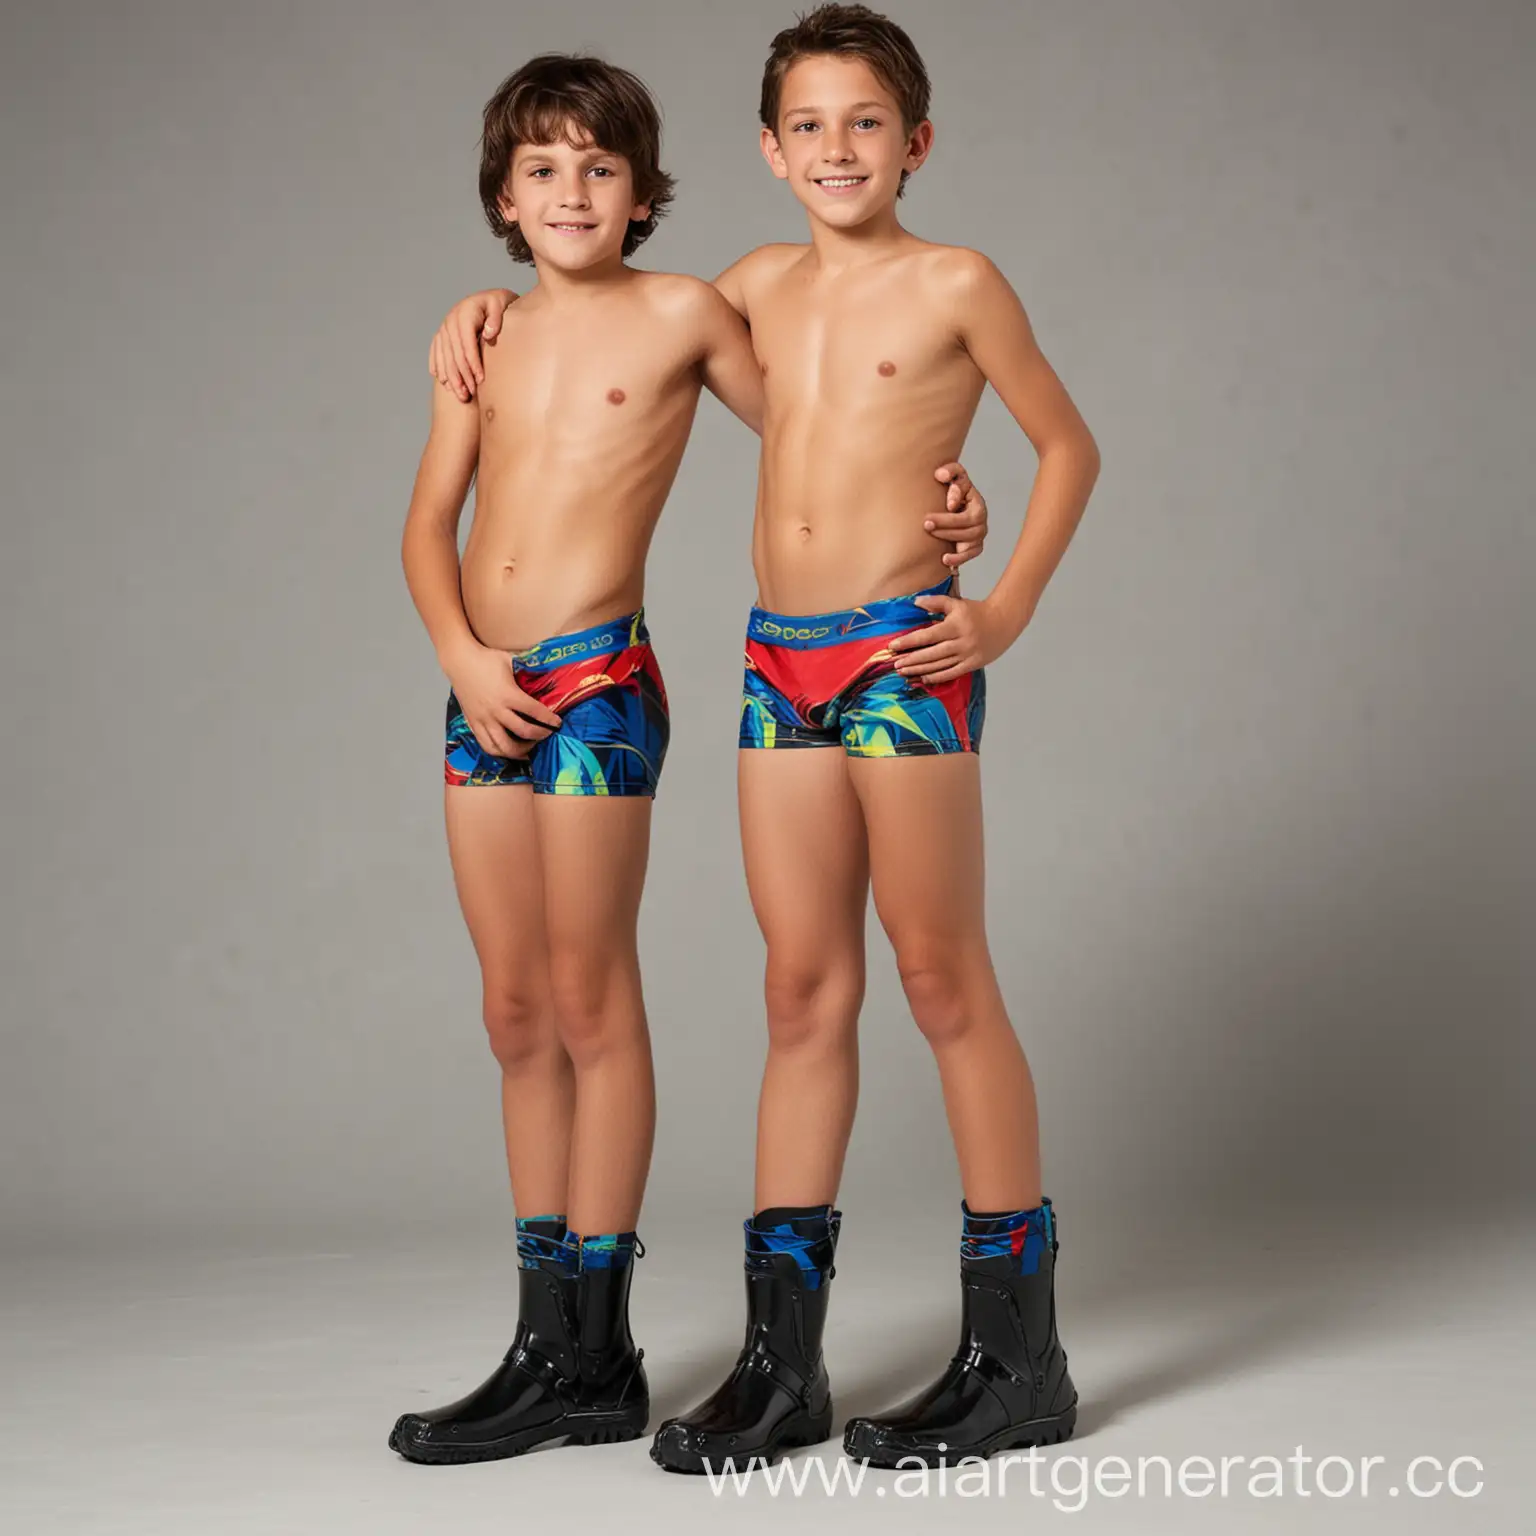 Preteen-Boy-in-Speedo-Shorts-and-Short-Boots